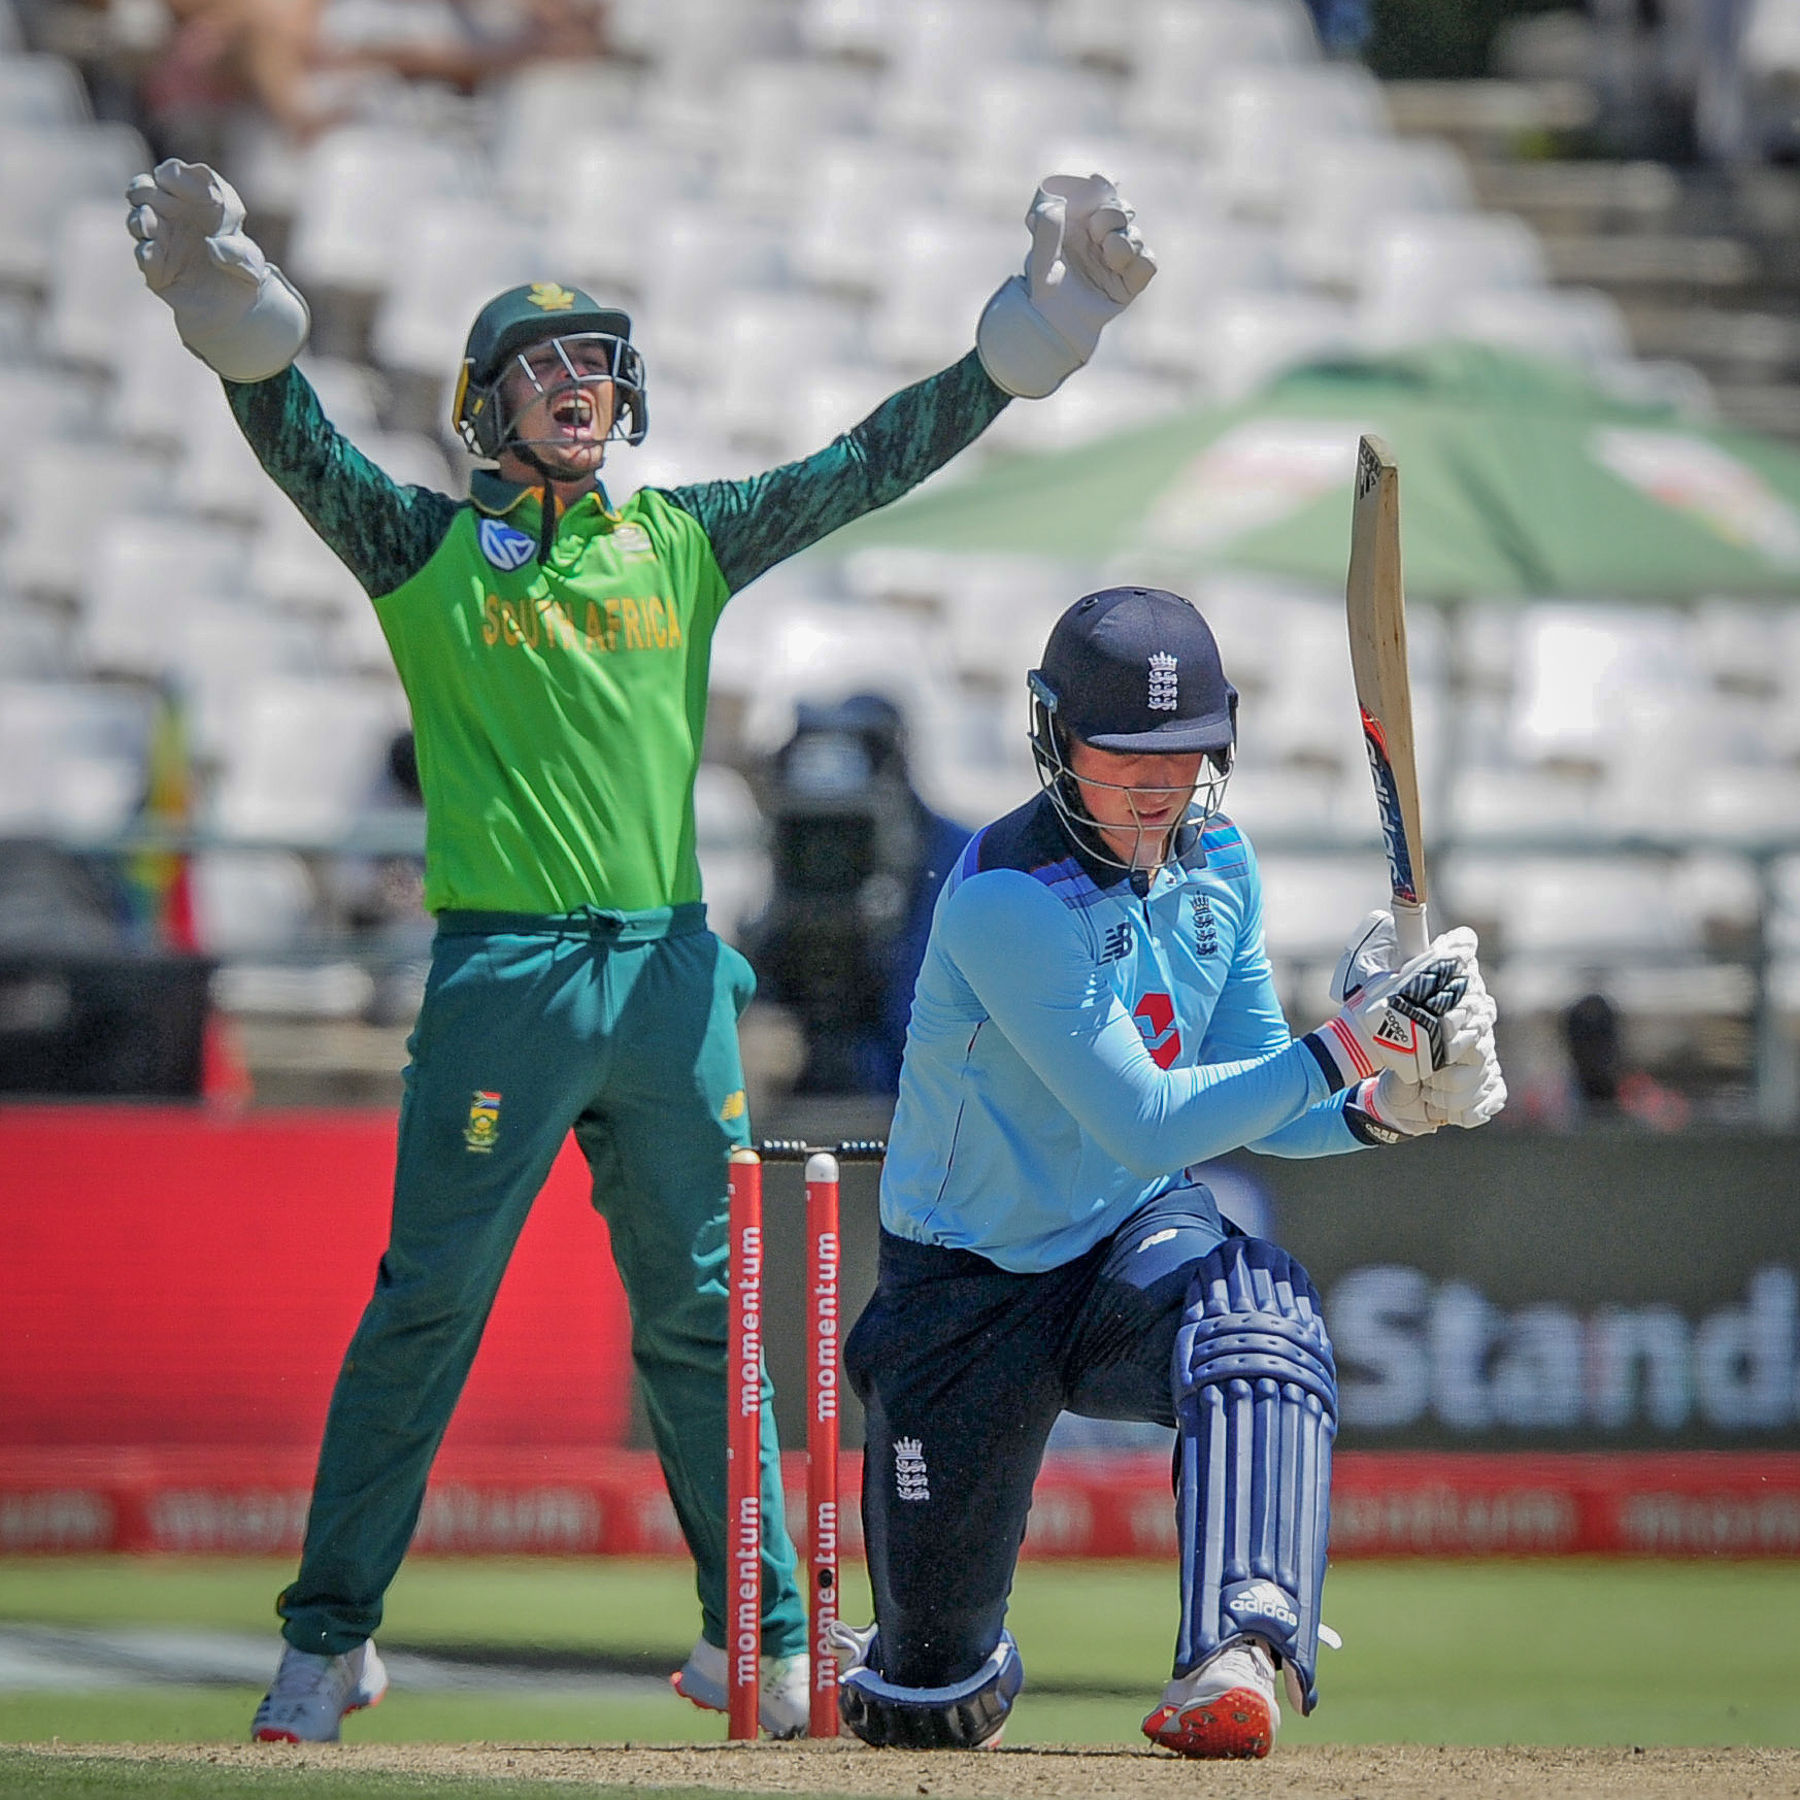 South Africa-England ODI series gets green light after Proteas squad test negative for COVID-19